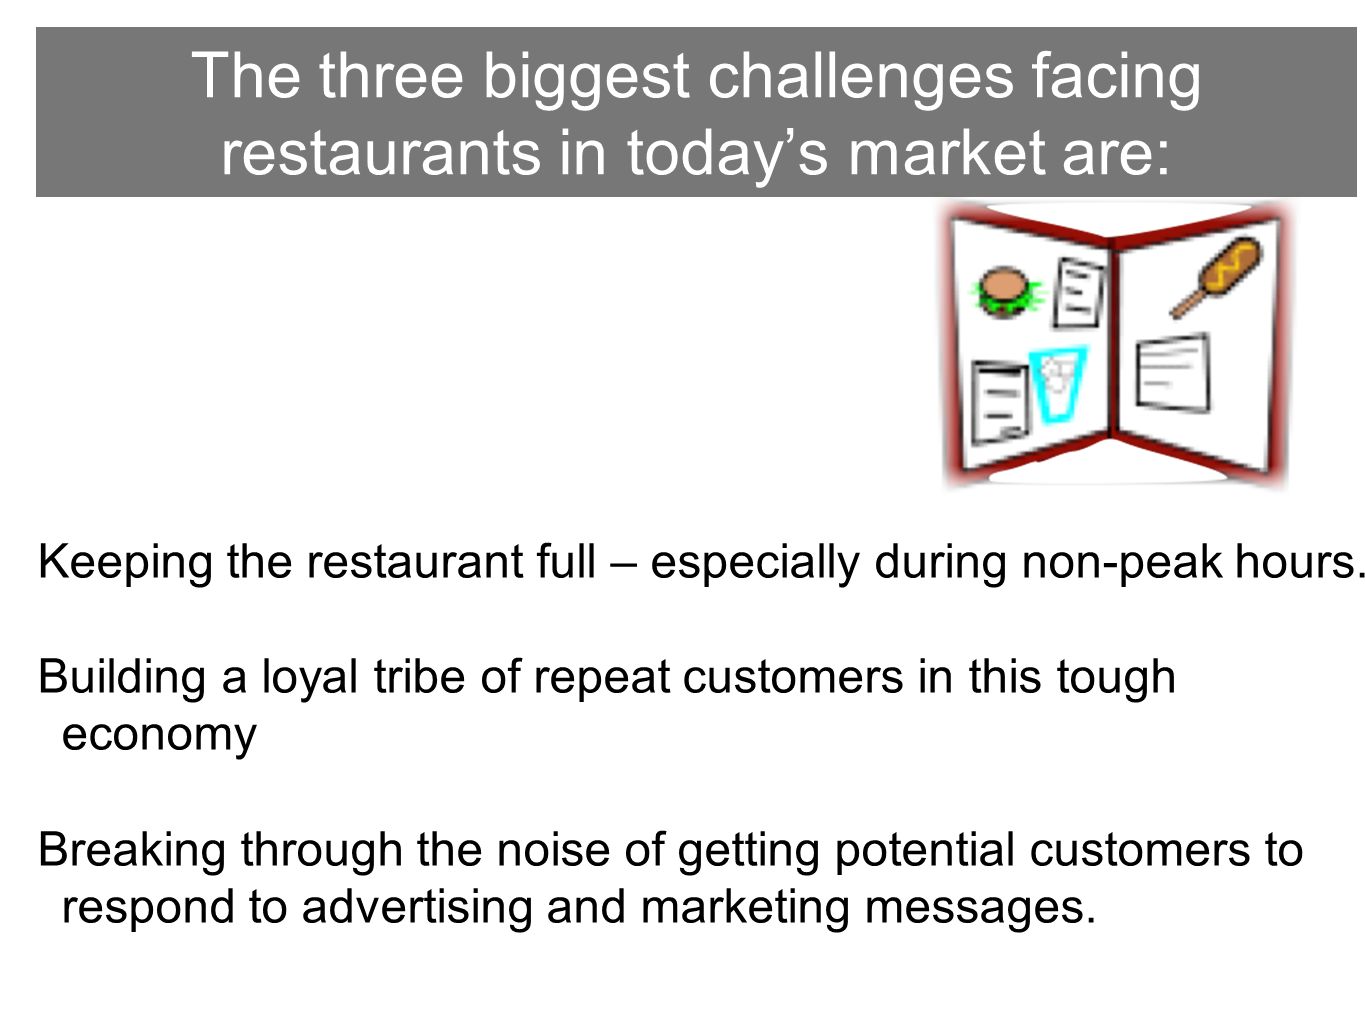 The three biggest challenges facing restaurants in today’s market are: Keeping the restaurant full – especially during non-peak hours.